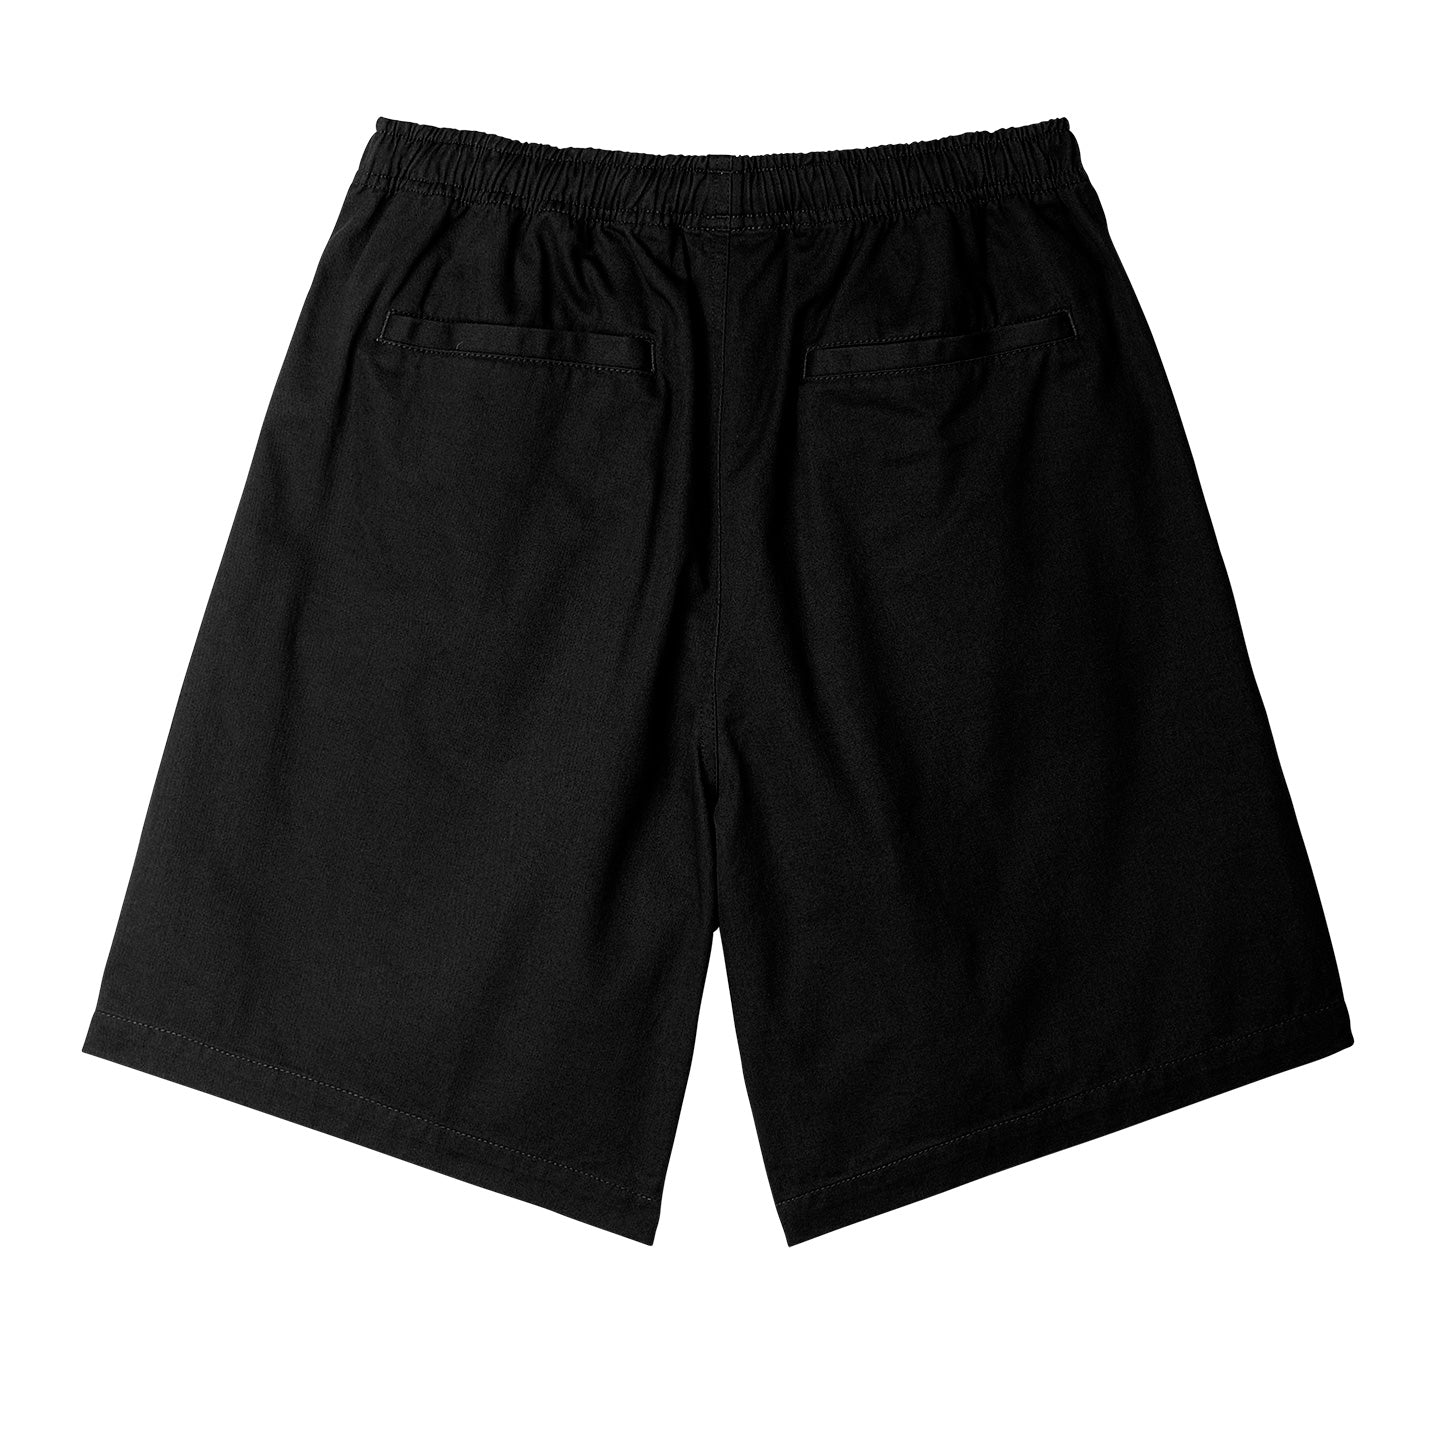 Obey Men's Easy Relaxed Twill Short Black 172120078 BLK